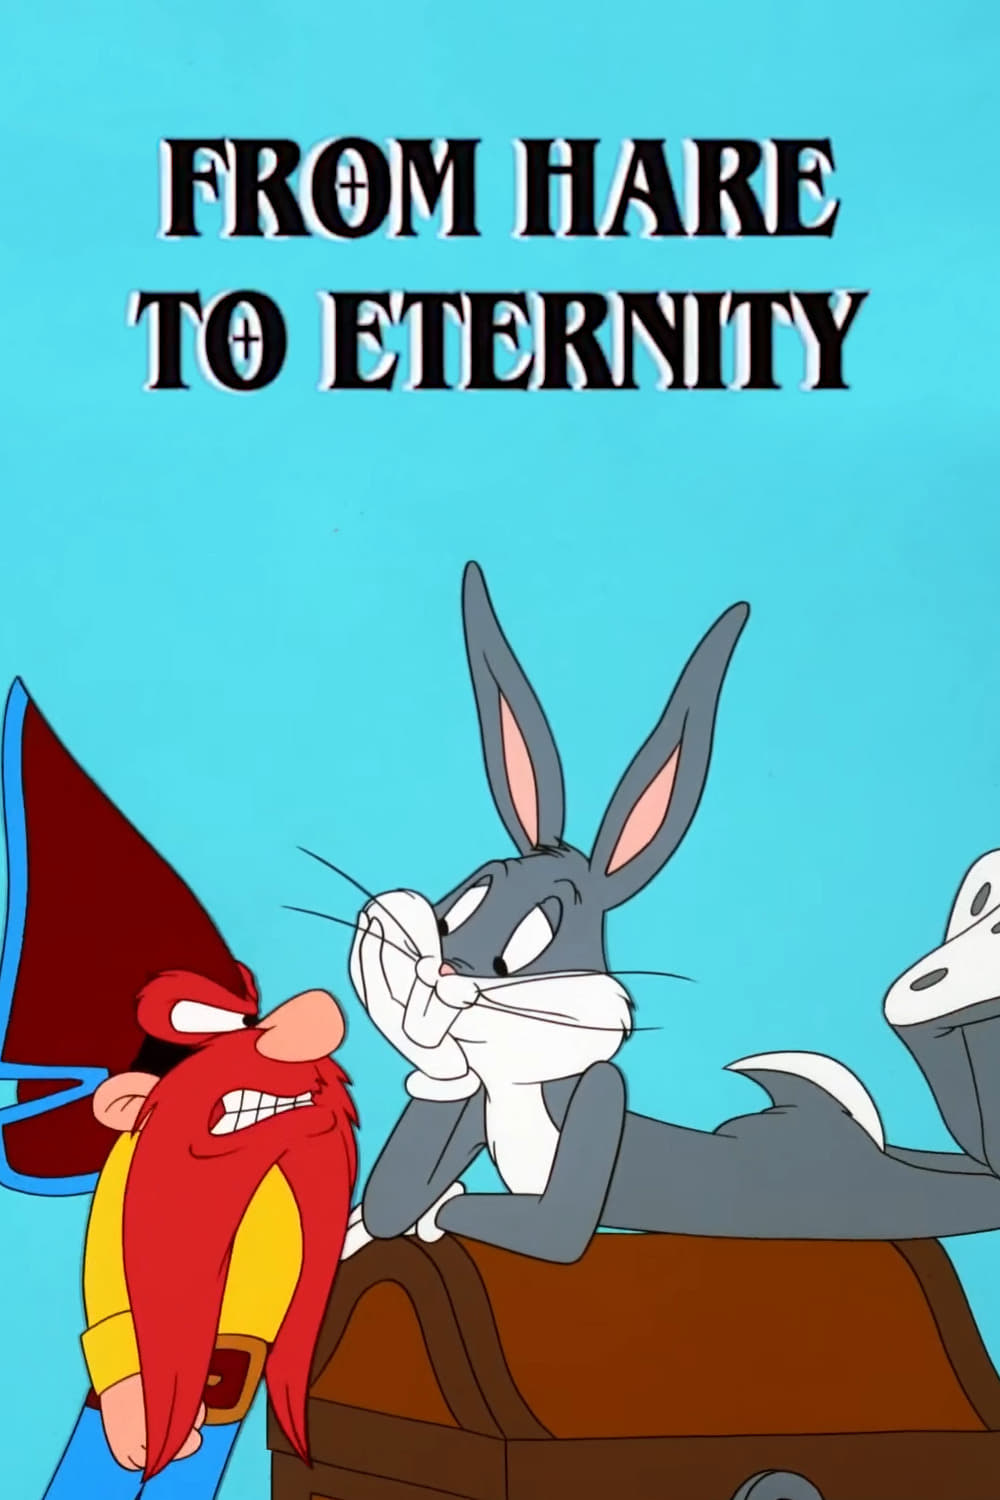 From Hare to Eternity